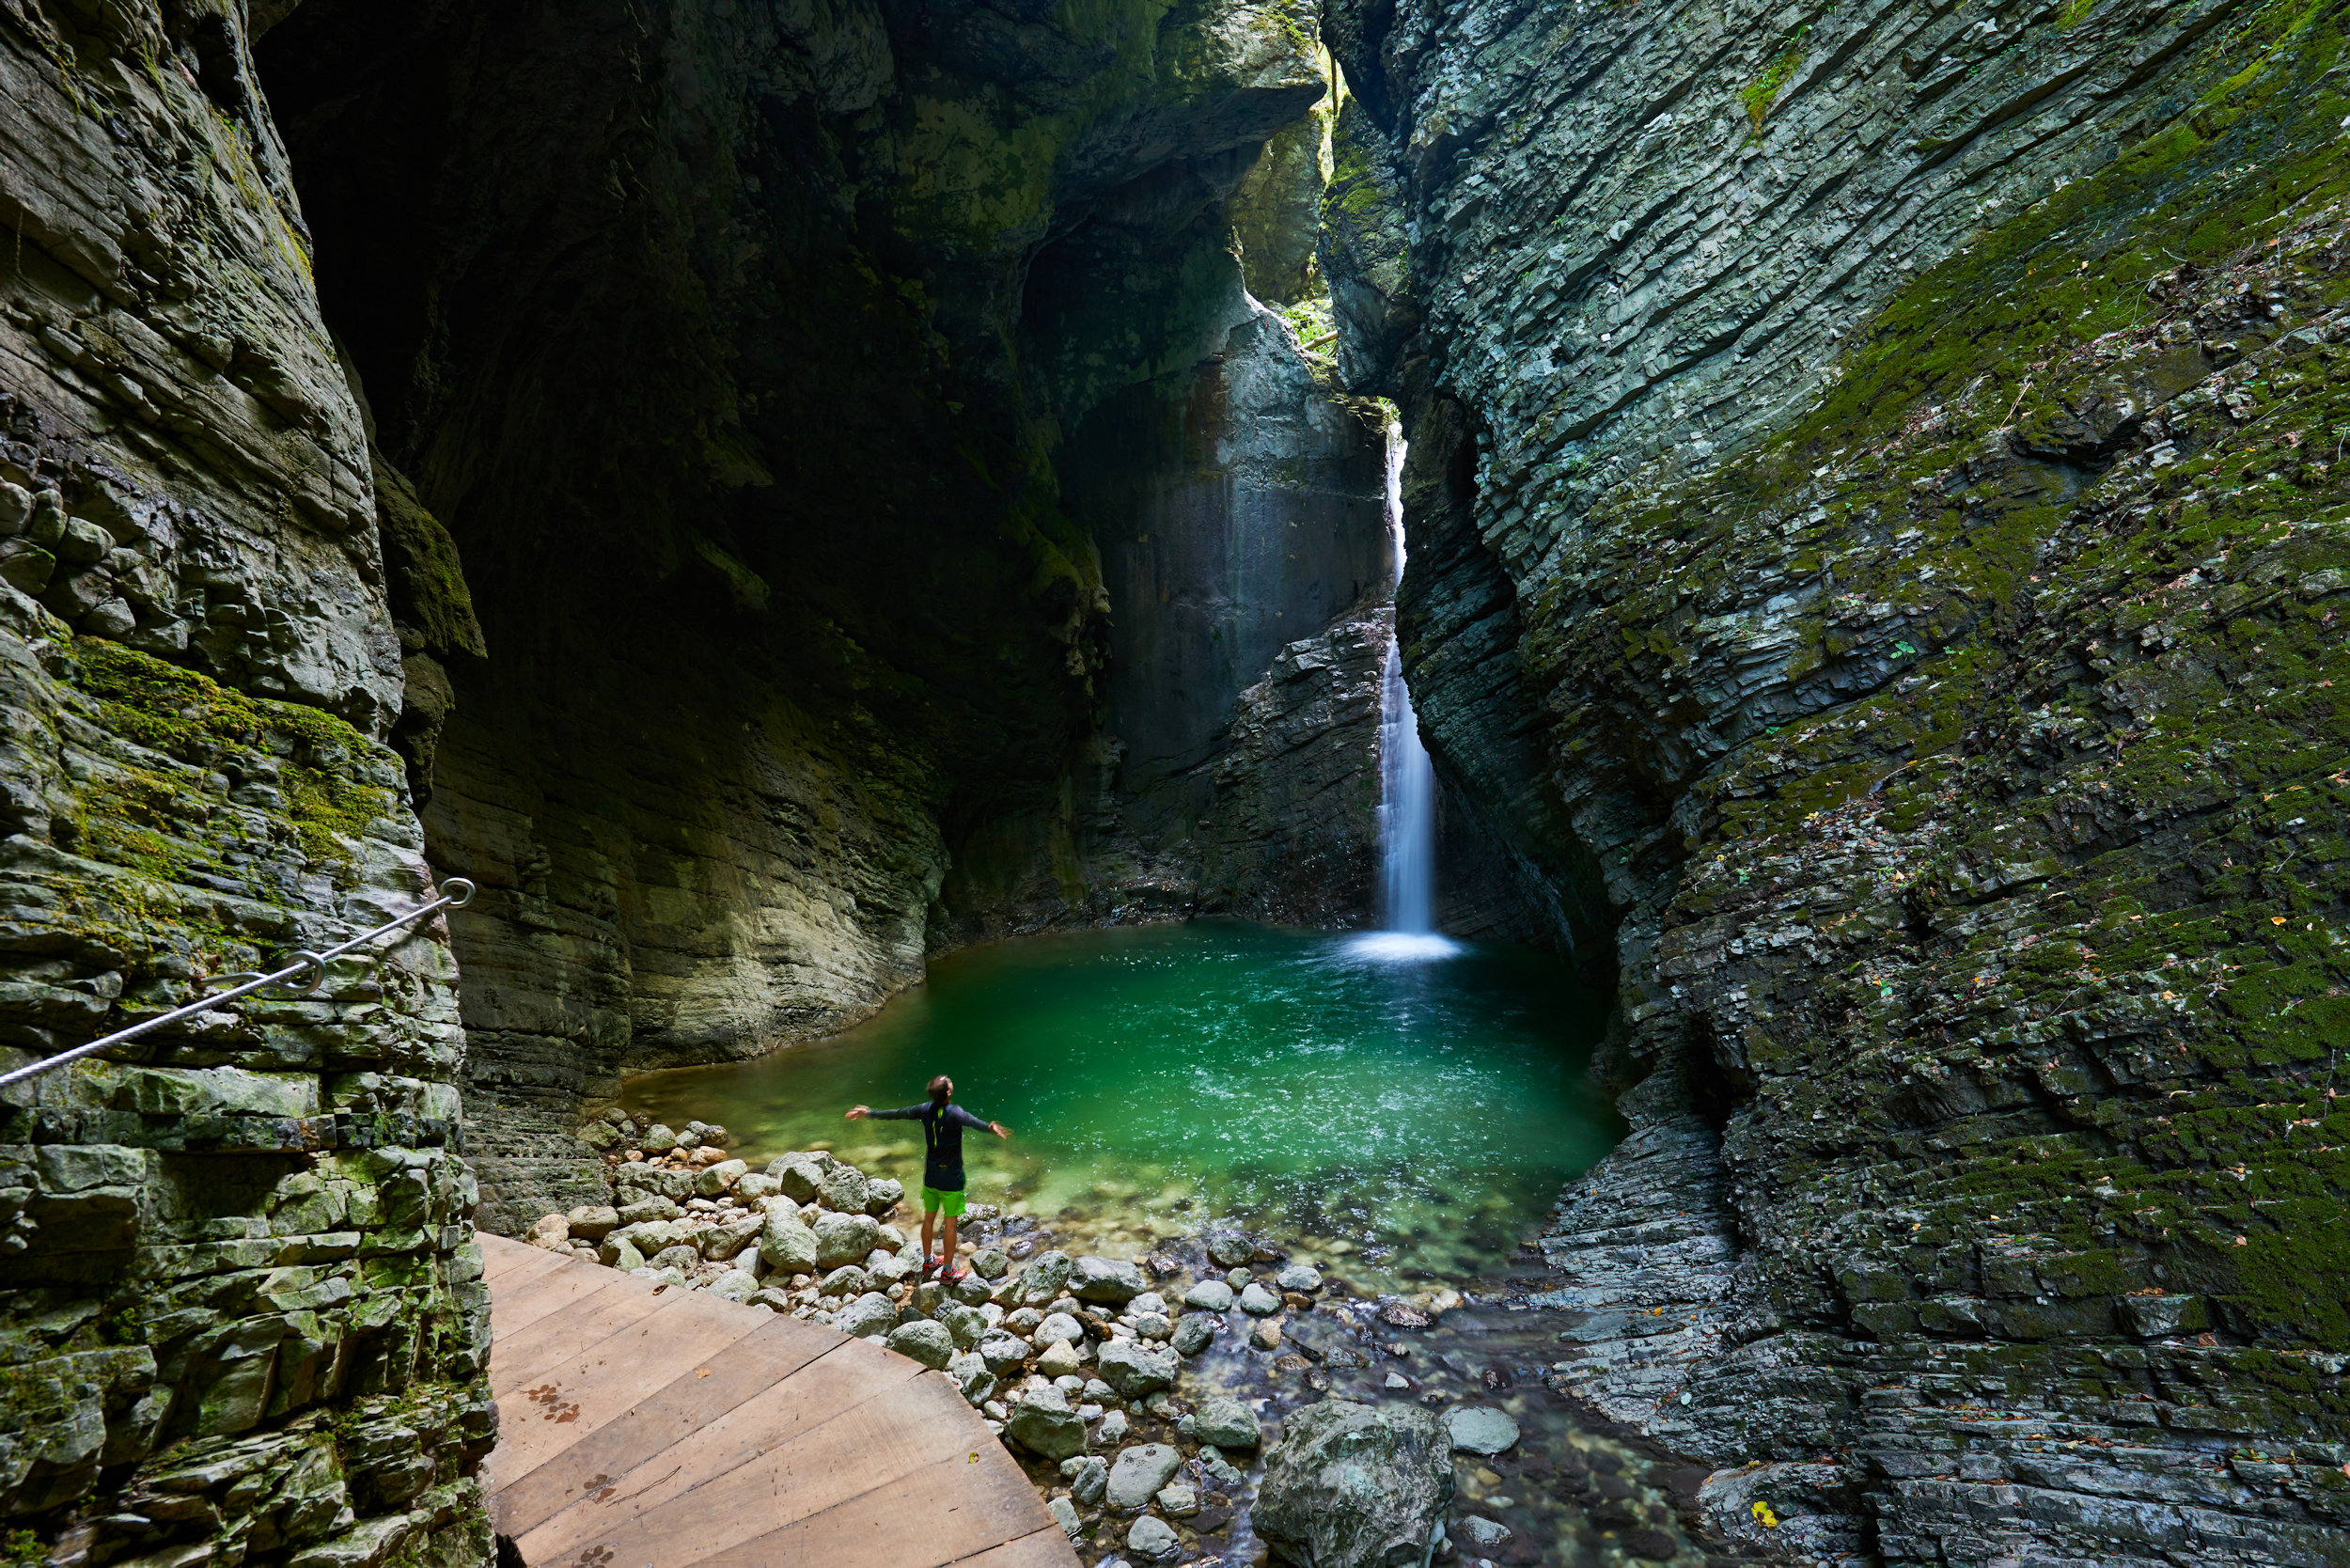 Discover Slovenia on Twitter: "KOZJAK WATERFALL, #Slovenia - a very unique and very picturesque 15-meter-high #waterfall with a swimmable emerald-green pool at its base. (photos: Tomanovic, Miroslav Asanin, Jesenicnik #photography) #